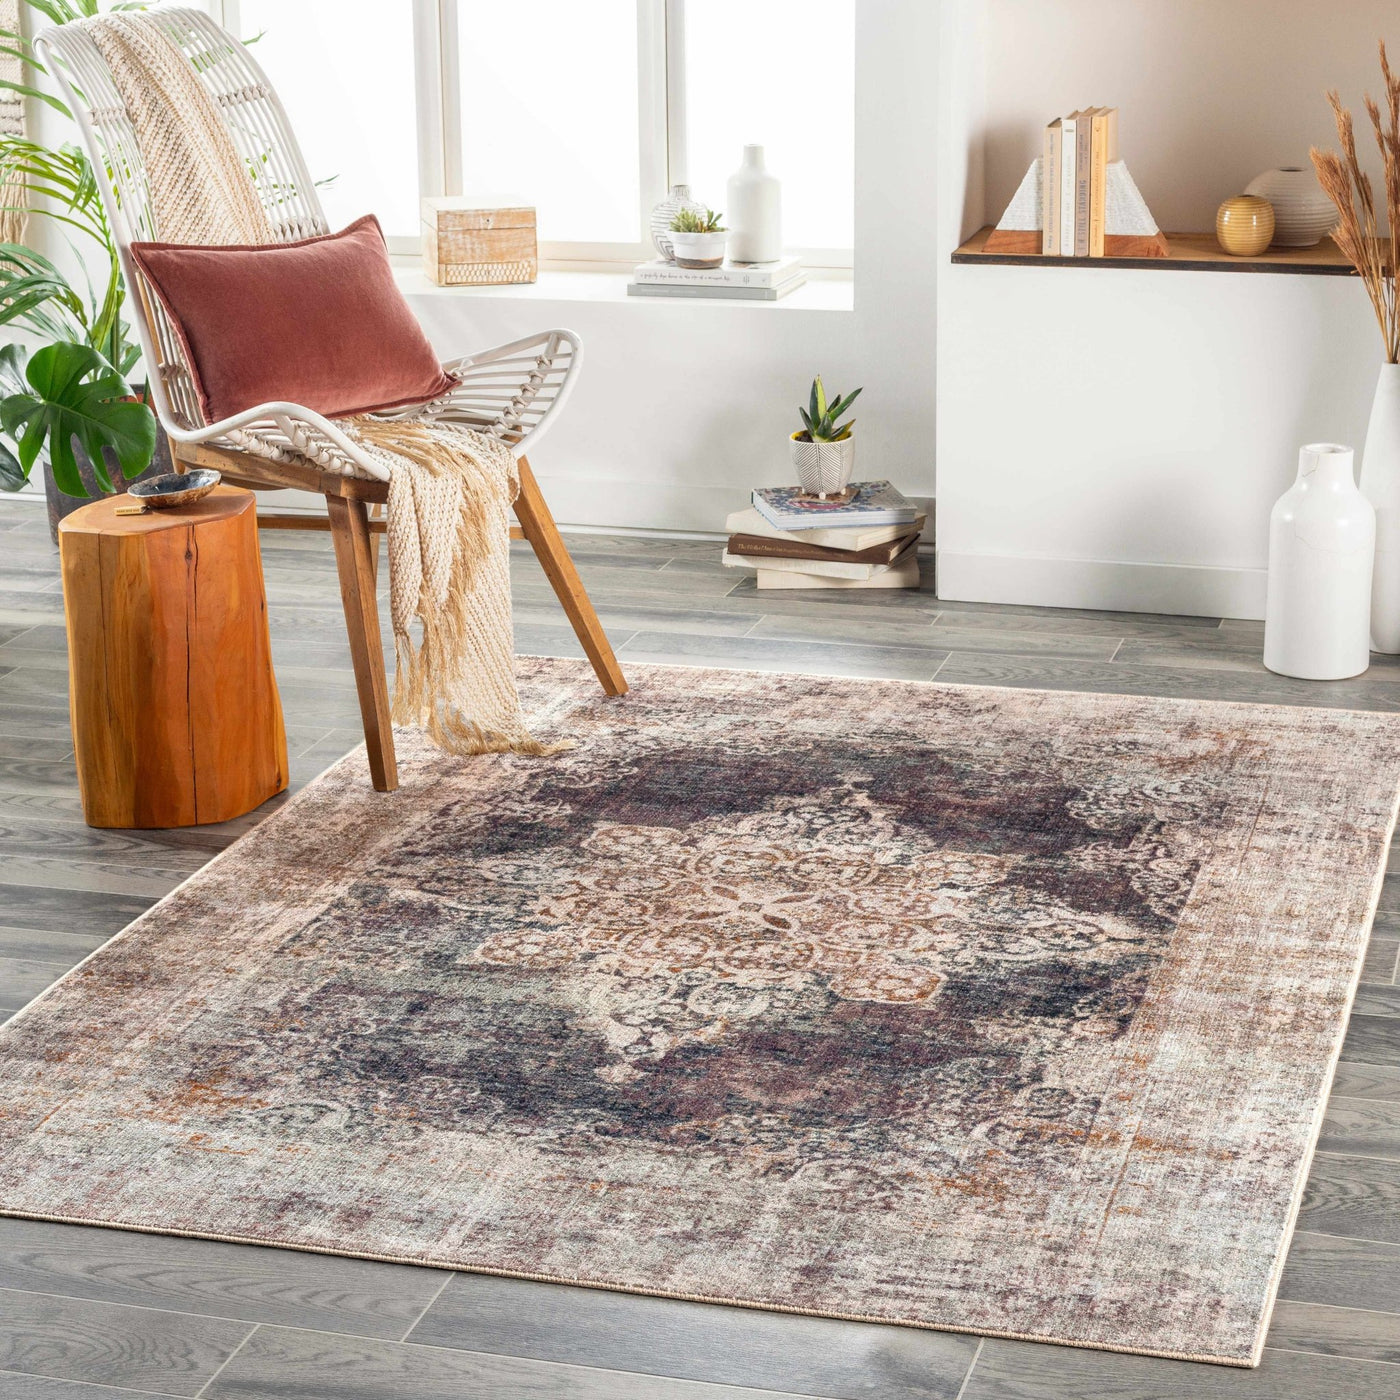 Puloypuloy Washable Area Rug - Sweet Water Decor - Rugs